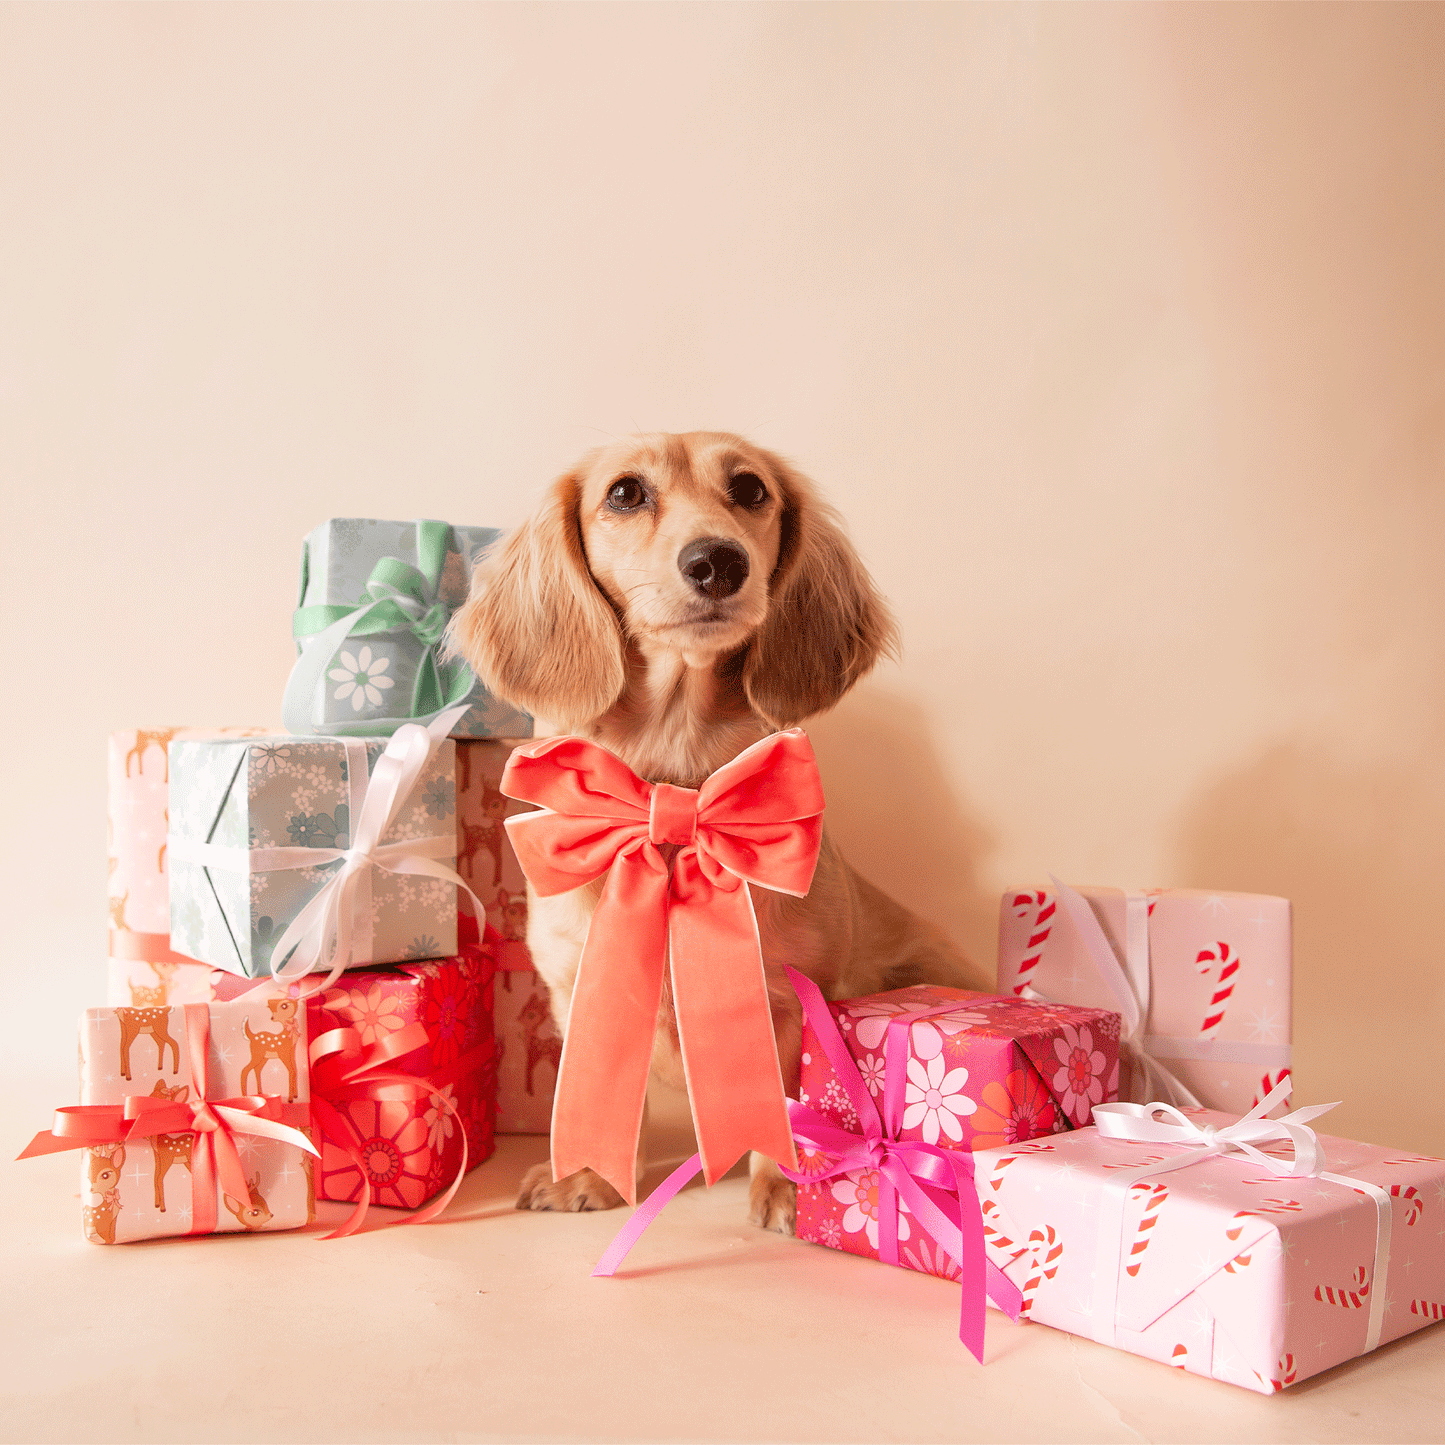 On a tan background is a dachshund sitting next to wrapped gifts and wearing our velvet bow in the shape peach.